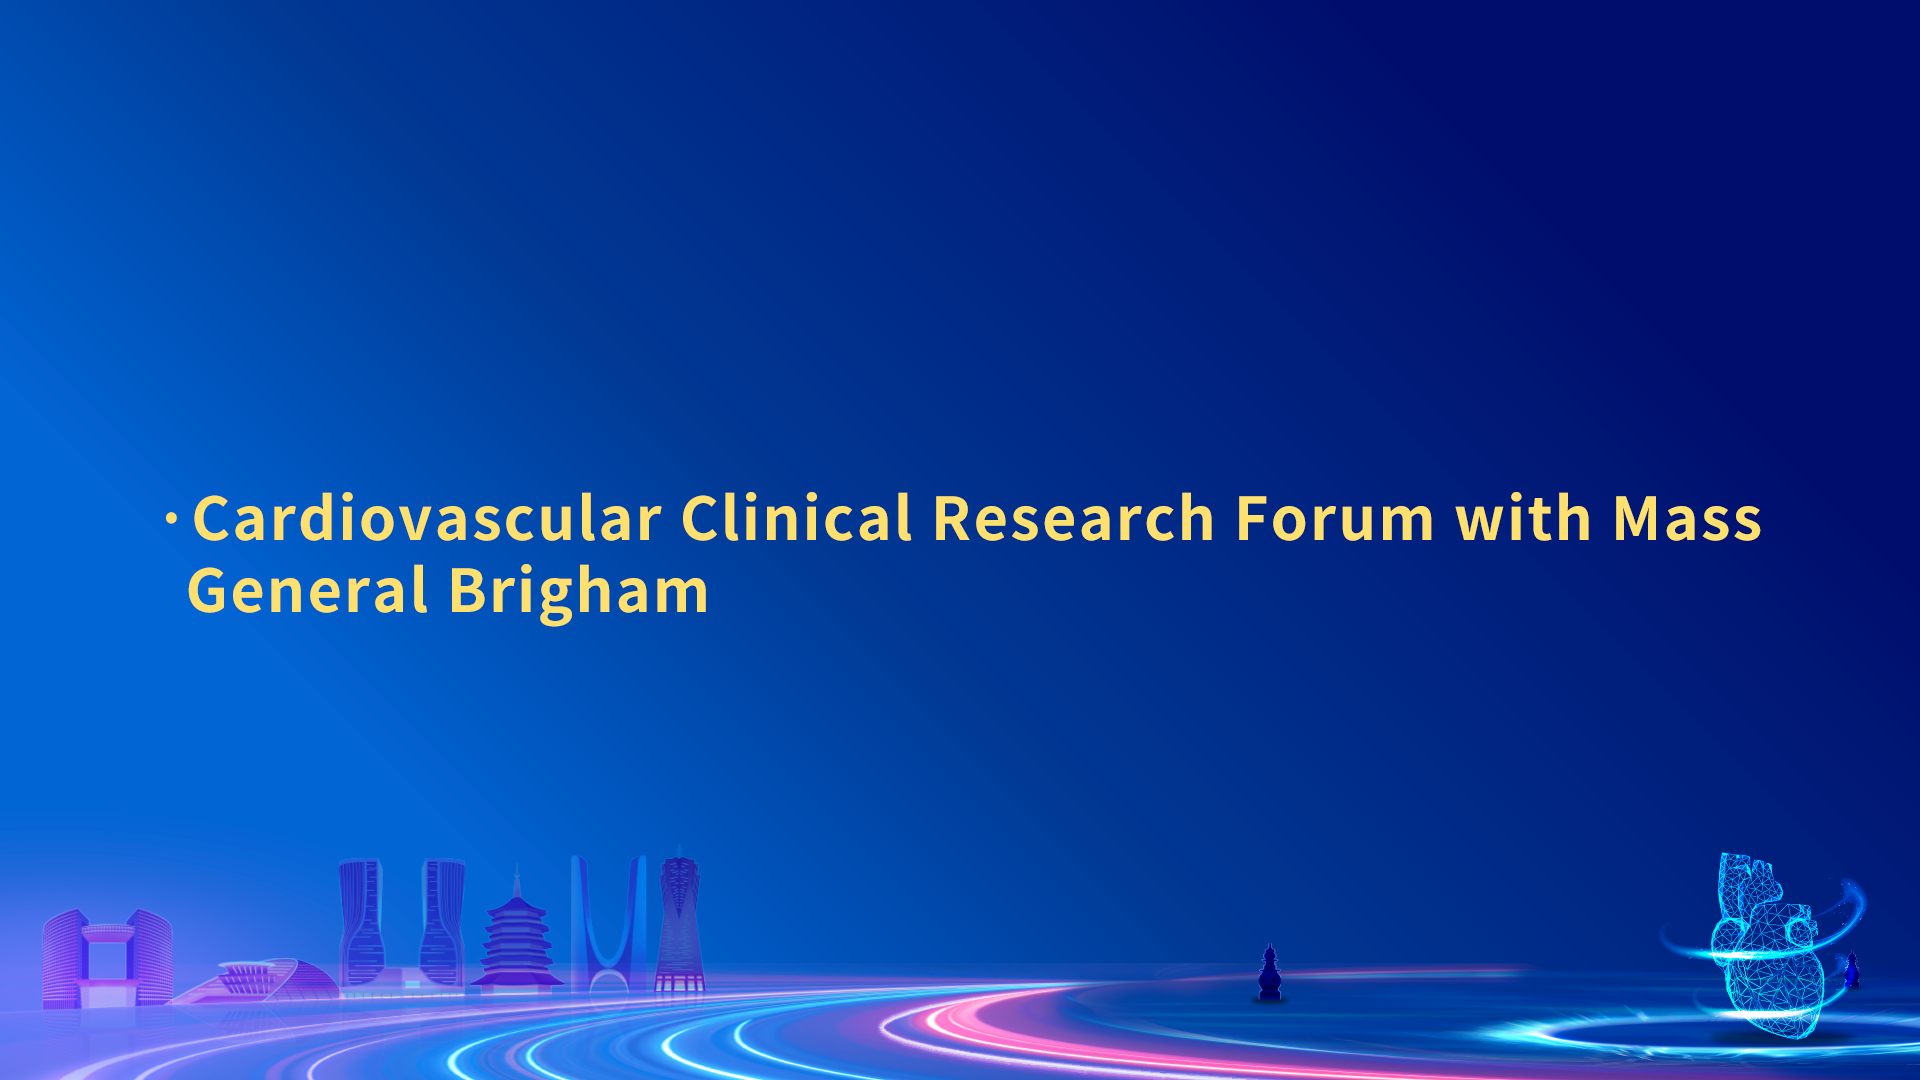 International Channel
Cardiovascular Clinical Research Forum with Mass General Brigham